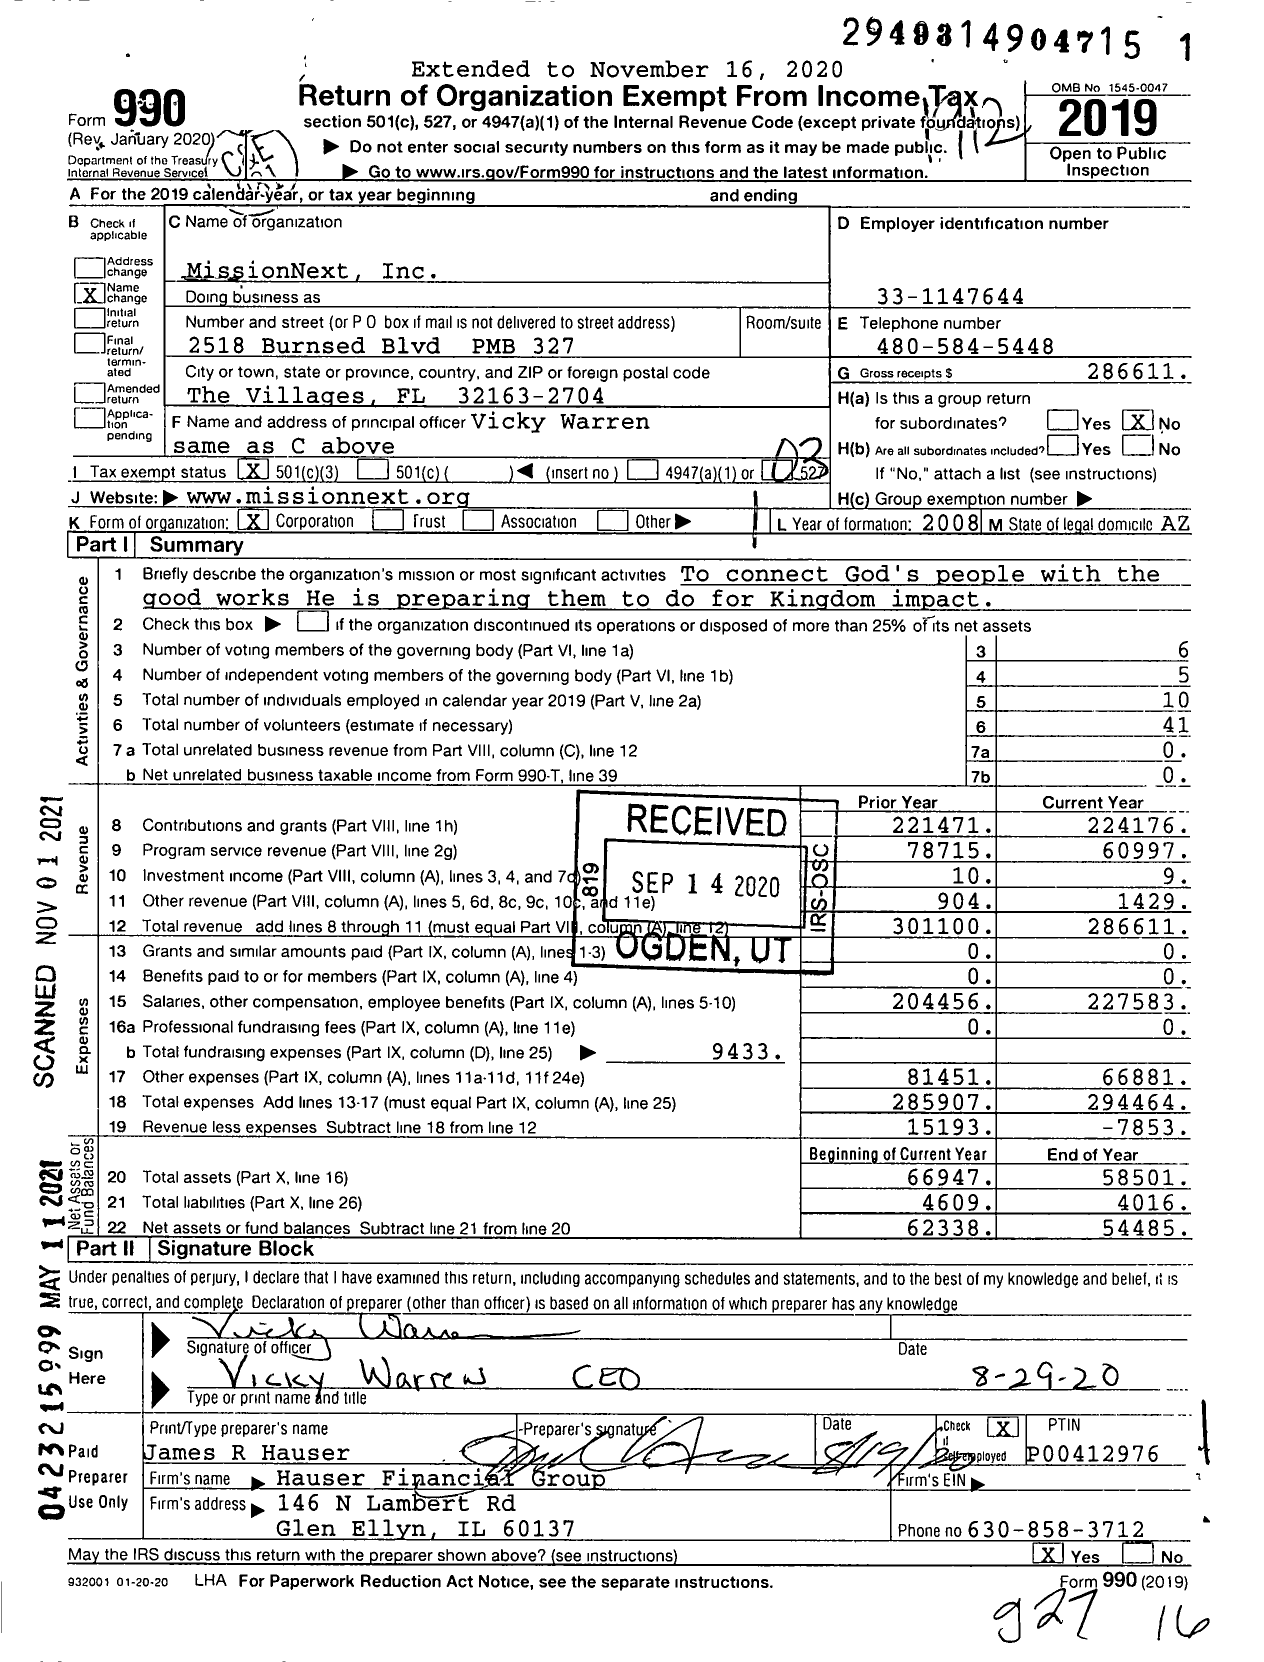 Image of first page of 2019 Form 990 for MissionNext